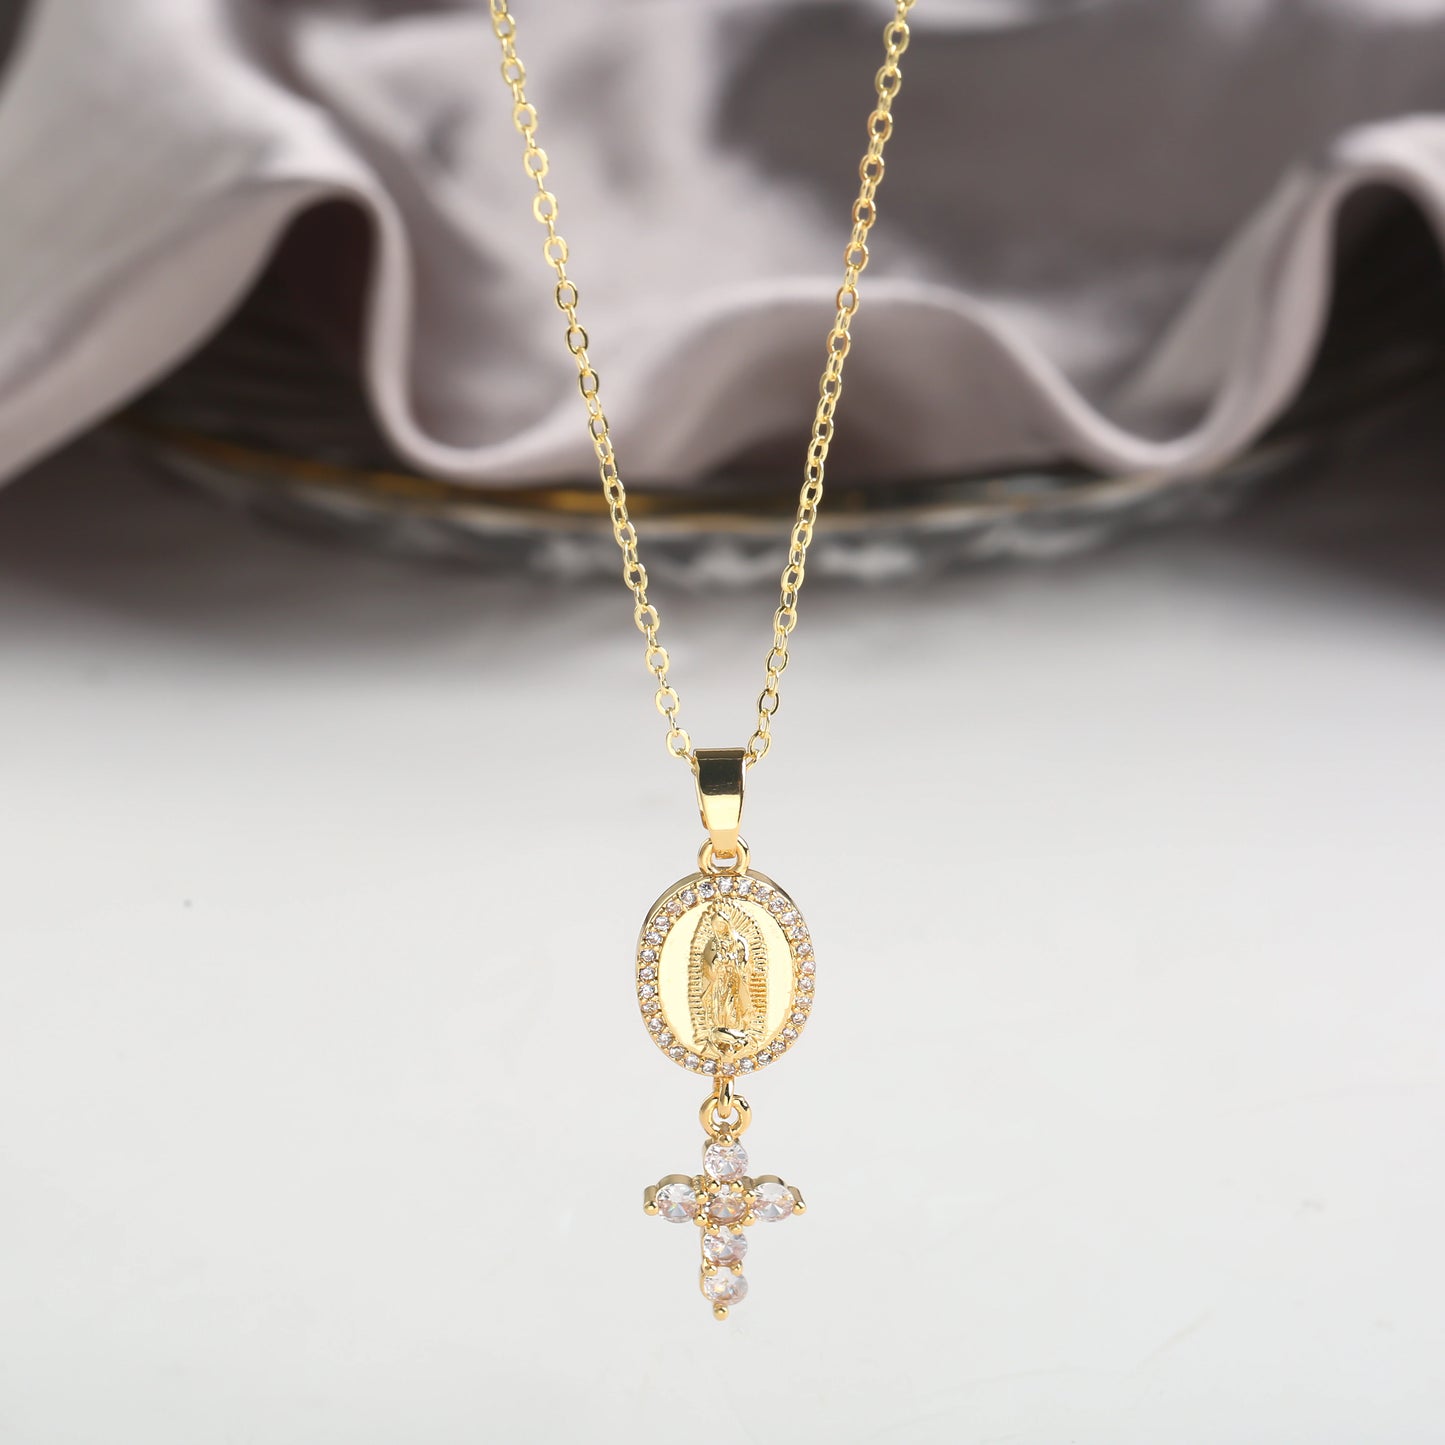 the serenity necklace – By Deanna